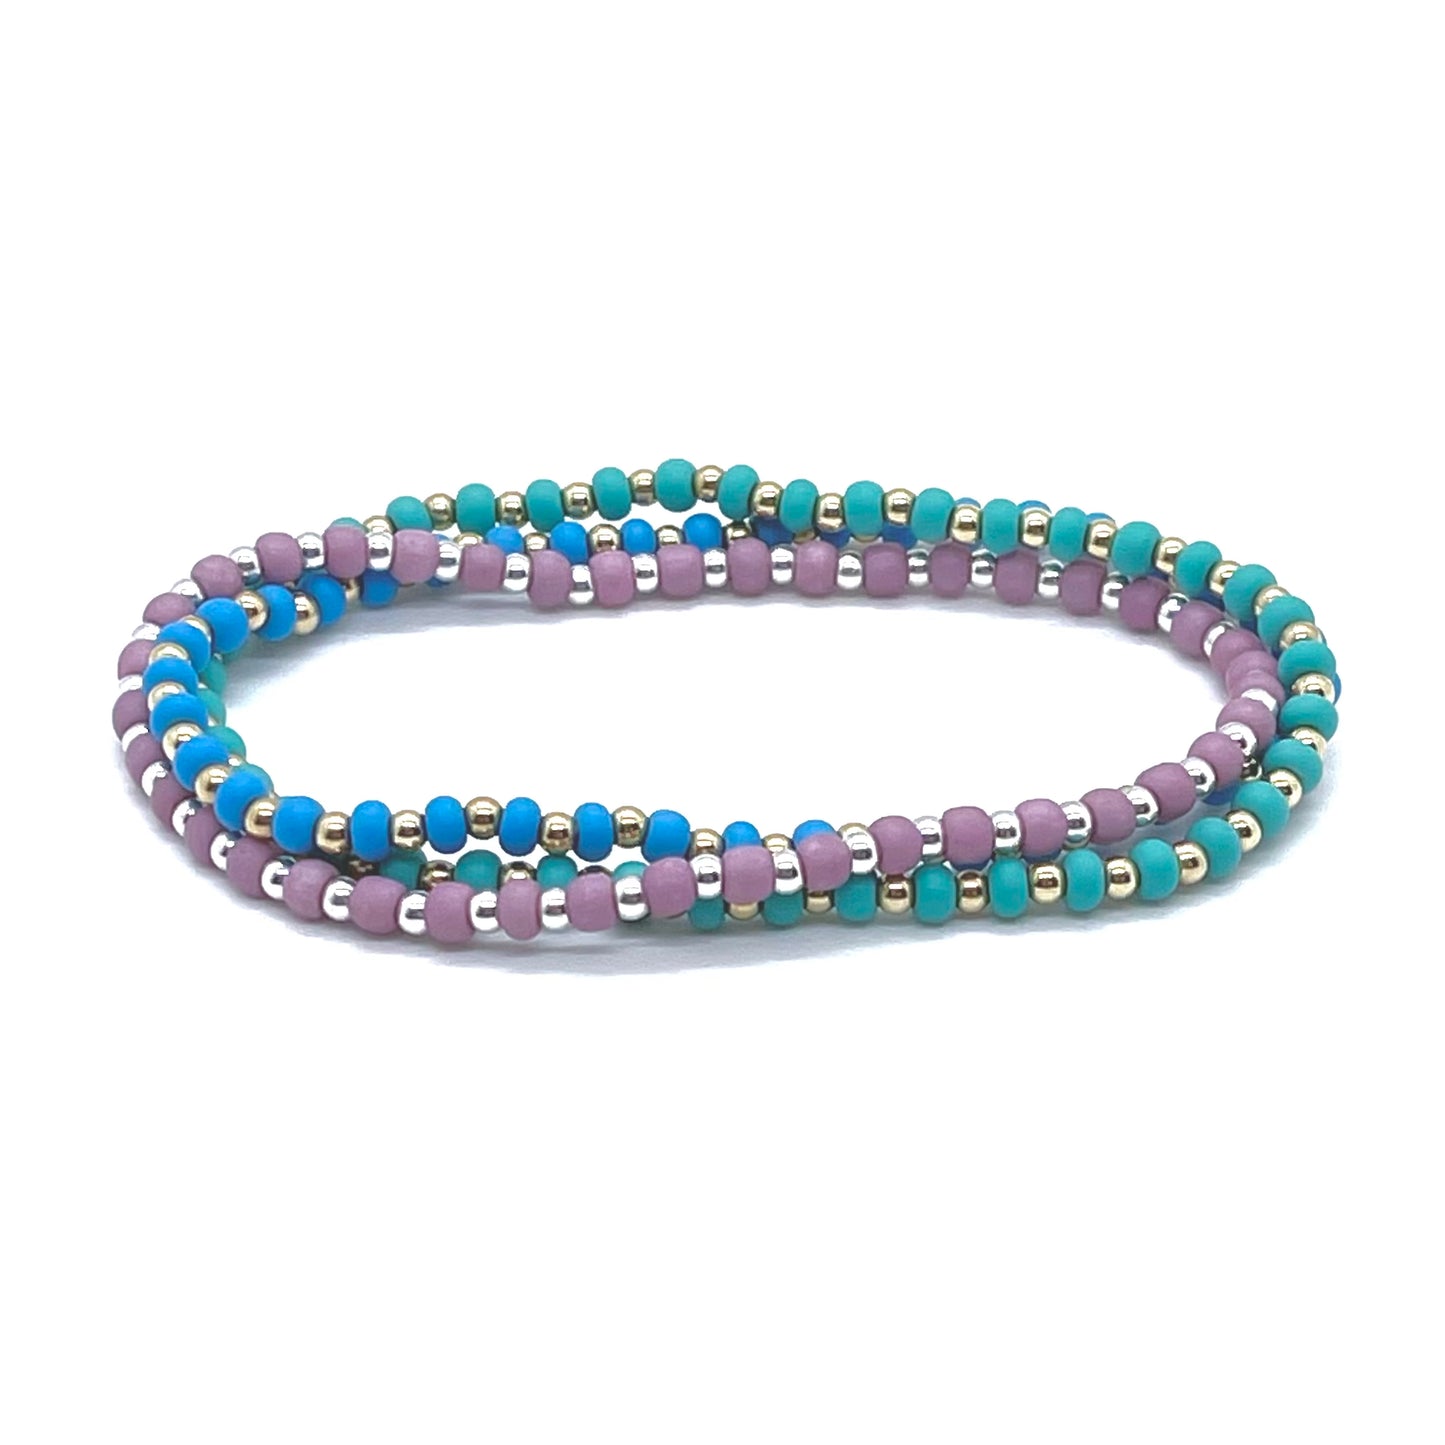 Matte seed bead stretchy anklets with waterproof gold fill and sterling silver 3mm ball beads and mauve, blue and green seed beads.